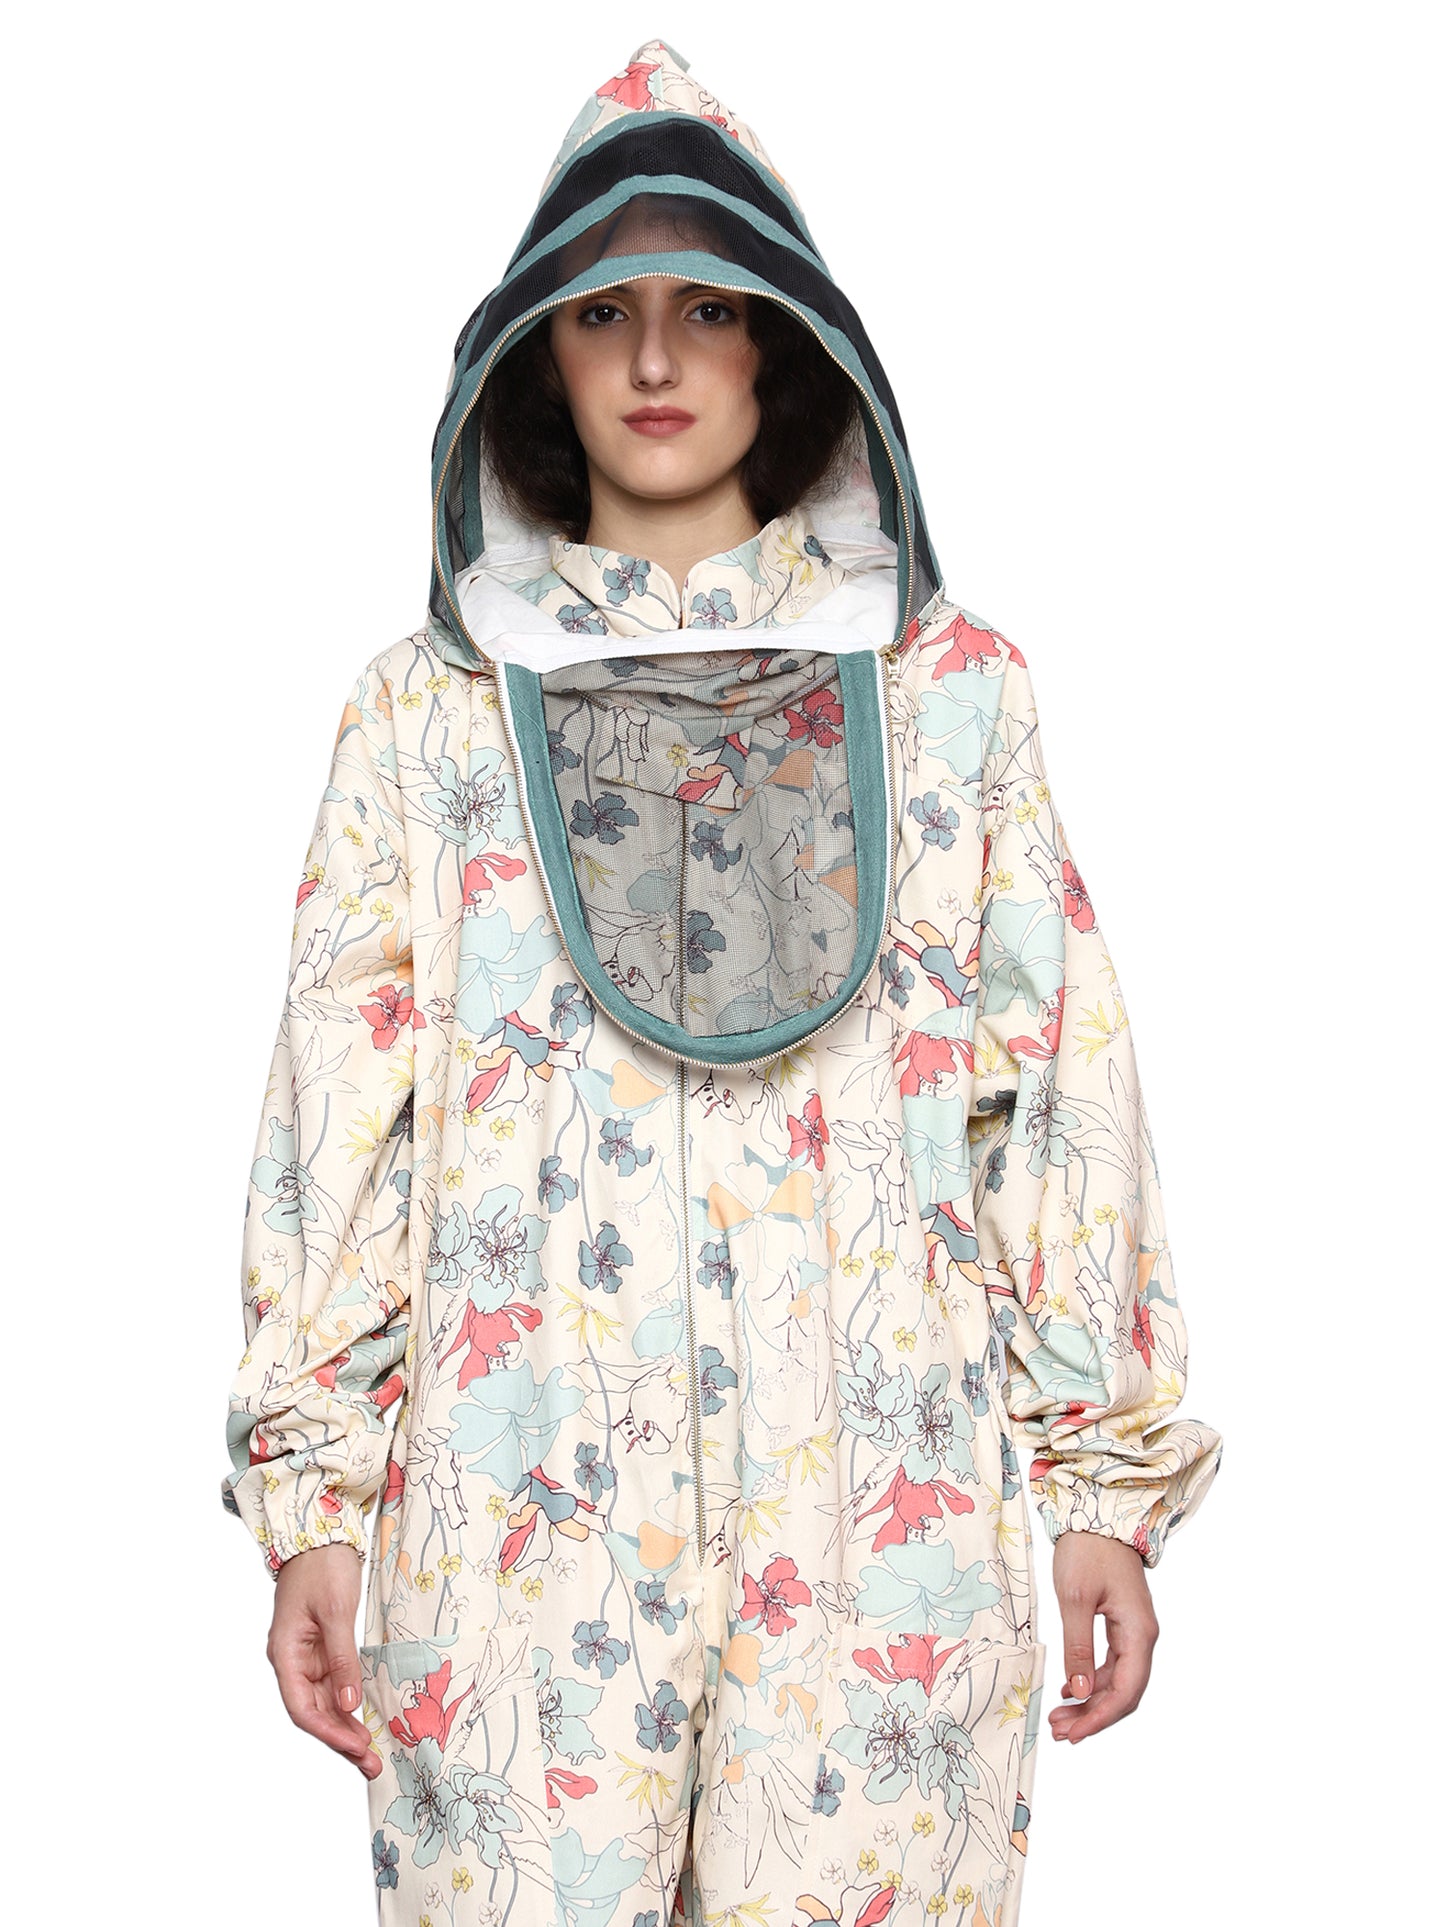 Beeattire Multicolor Flower Printed Cotton Bee Suit for Women with Veil